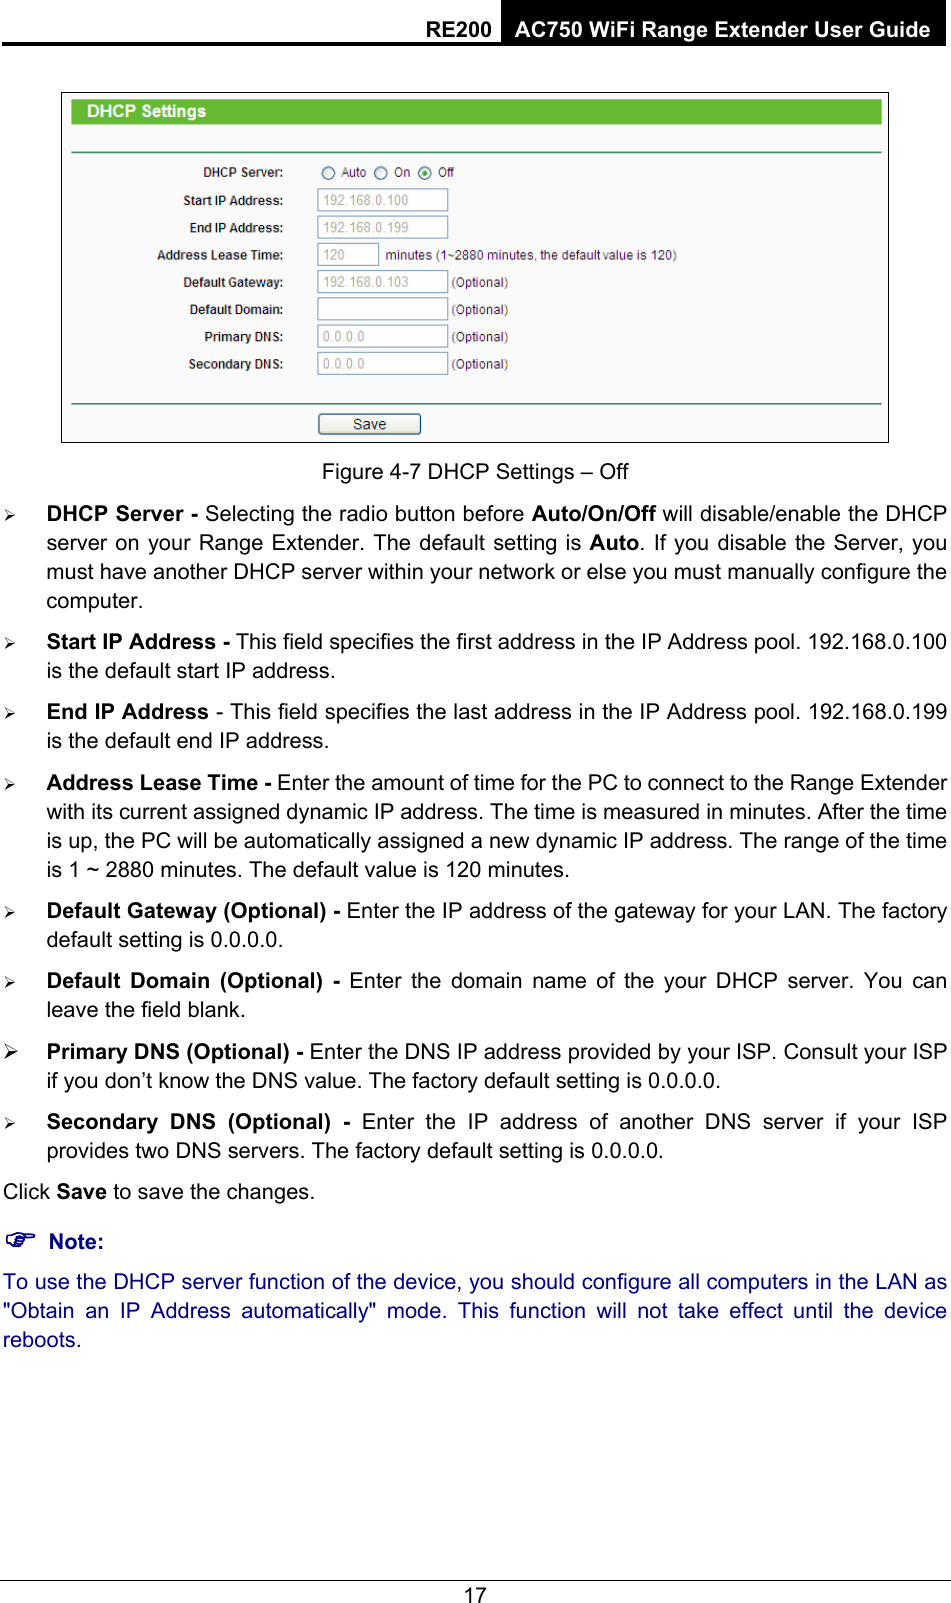 RE200 AC750 WiFi Range Extender User Guide  Figure 4-7 DHCP Settings – Off ¾ DHCP Server - Selecting the radio button before Auto/On/Off will disable/enable the DHCP server on your Range Extender. The default setting is Auto. If you disable the Server, you must have another DHCP server within your network or else you must manually configure the computer. ¾ Start IP Address - This field specifies the first address in the IP Address pool. 192.168.0.100 is the default start IP address.   ¾ End IP Address - This field specifies the last address in the IP Address pool. 192.168.0.199 is the default end IP address.   ¾ Address Lease Time - Enter the amount of time for the PC to connect to the Range Extender with its current assigned dynamic IP address. The time is measured in minutes. After the time is up, the PC will be automatically assigned a new dynamic IP address. The range of the time is 1 ~ 2880 minutes. The default value is 120 minutes. ¾ Default Gateway (Optional) - Enter the IP address of the gateway for your LAN. The factory default setting is 0.0.0.0. ¾ Default Domain (Optional) - Enter the domain name of the your DHCP server. You can leave the field blank. ¾ Primary DNS (Optional) - Enter the DNS IP address provided by your ISP. Consult your ISP if you don’t know the DNS value. The factory default setting is 0.0.0.0. ¾ Secondary DNS (Optional) - Enter the IP address of another DNS server if your ISP provides two DNS servers. The factory default setting is 0.0.0.0. Click Save to save the changes. ) Note: To use the DHCP server function of the device, you should configure all computers in the LAN as &quot;Obtain an IP Address automatically&quot; mode. This function will not take effect until the device reboots.  17 